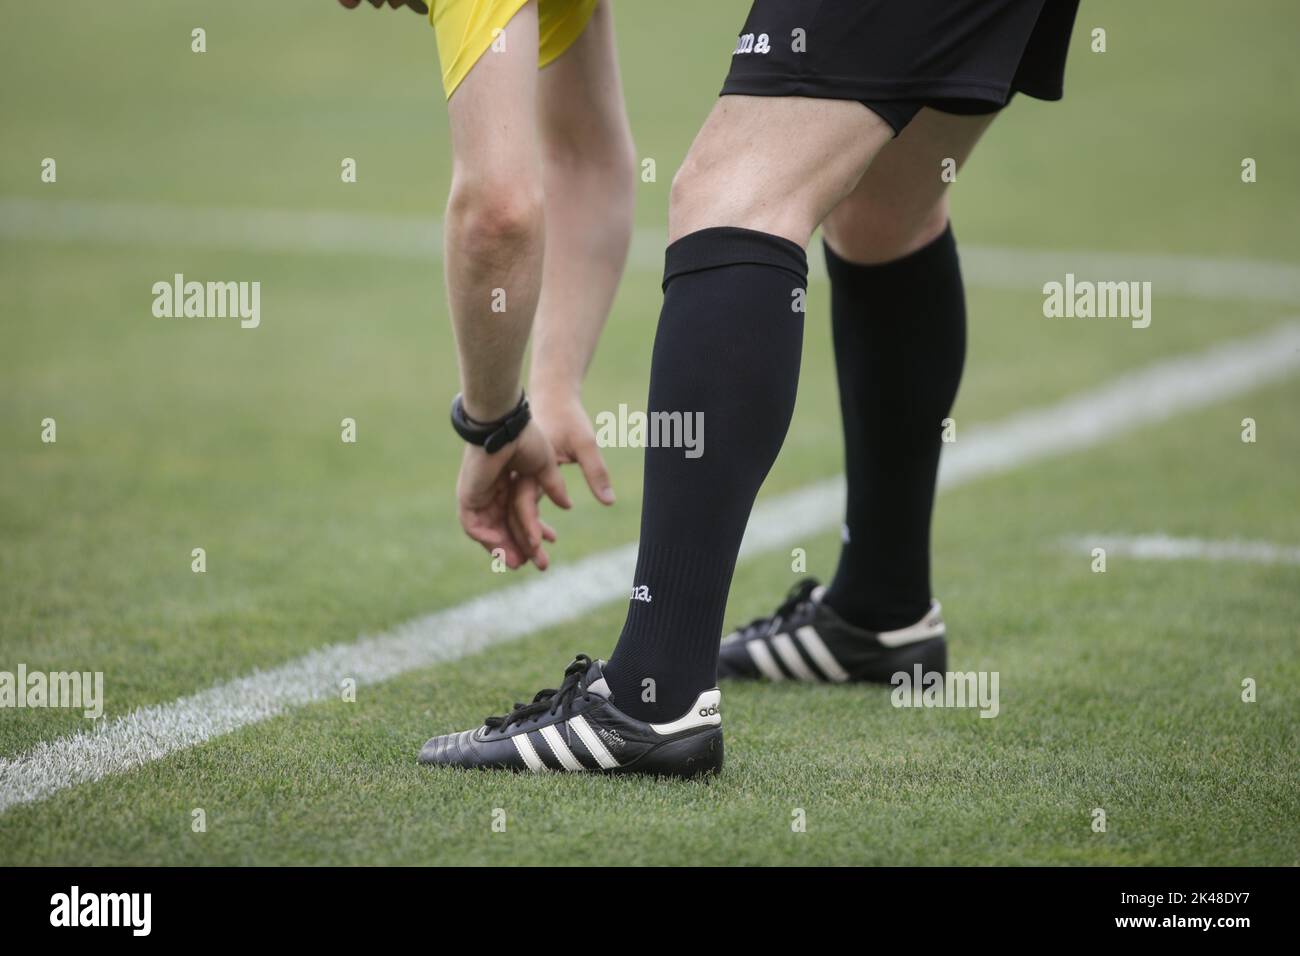 Giurgiu, Romania - June 29, 2020: Details with a football (soccer) referee stretching before a game. Stock Photo